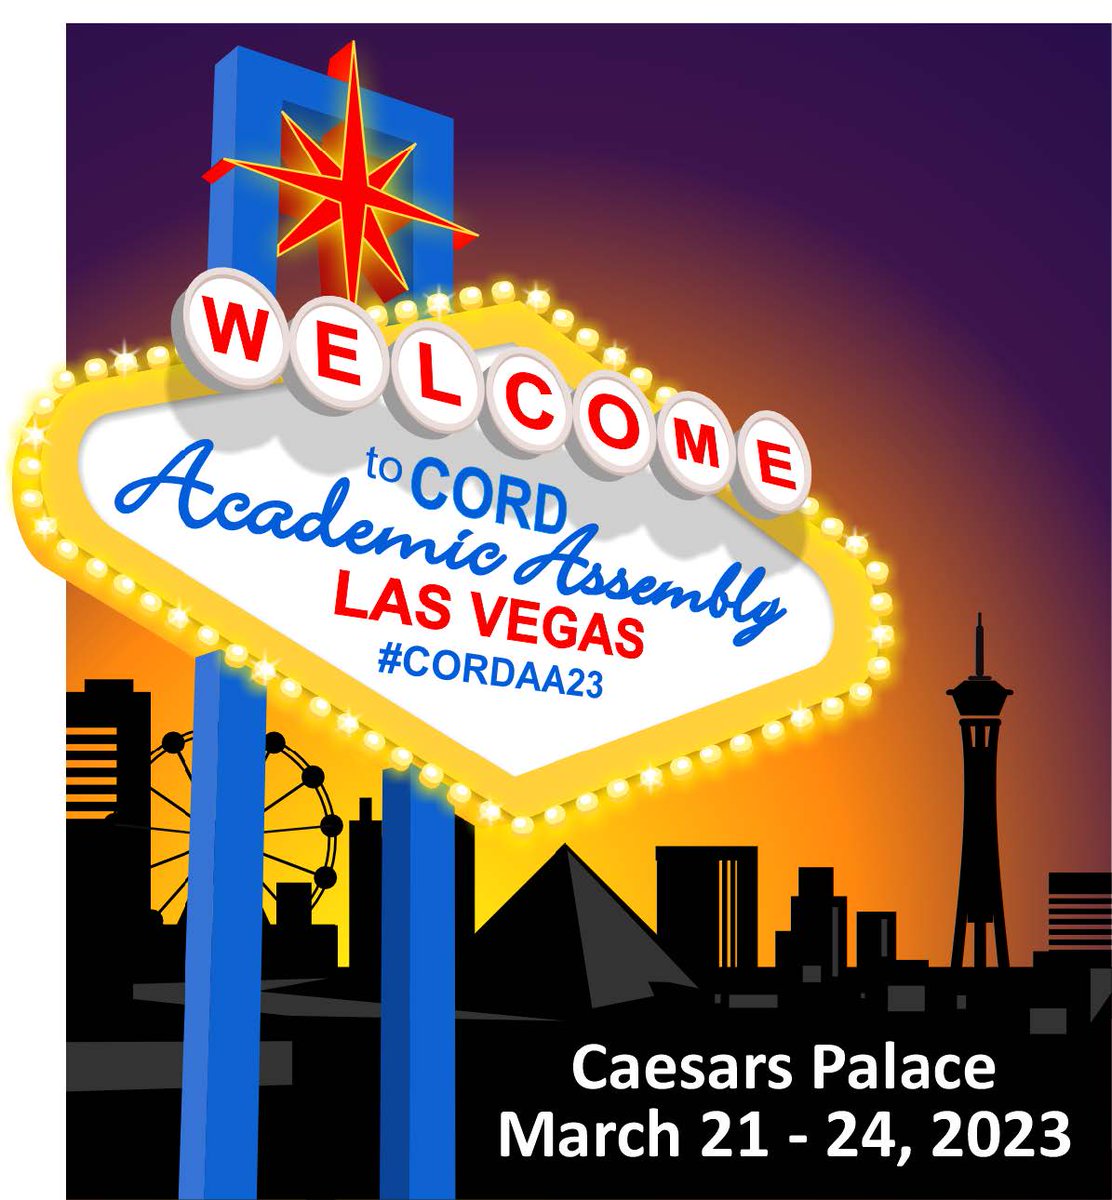 Mark your calendar! Our annual conference will take place March 21-24, 2023, in Las Vegas! More news to come soon, so stay tuned and save the date! 🍎